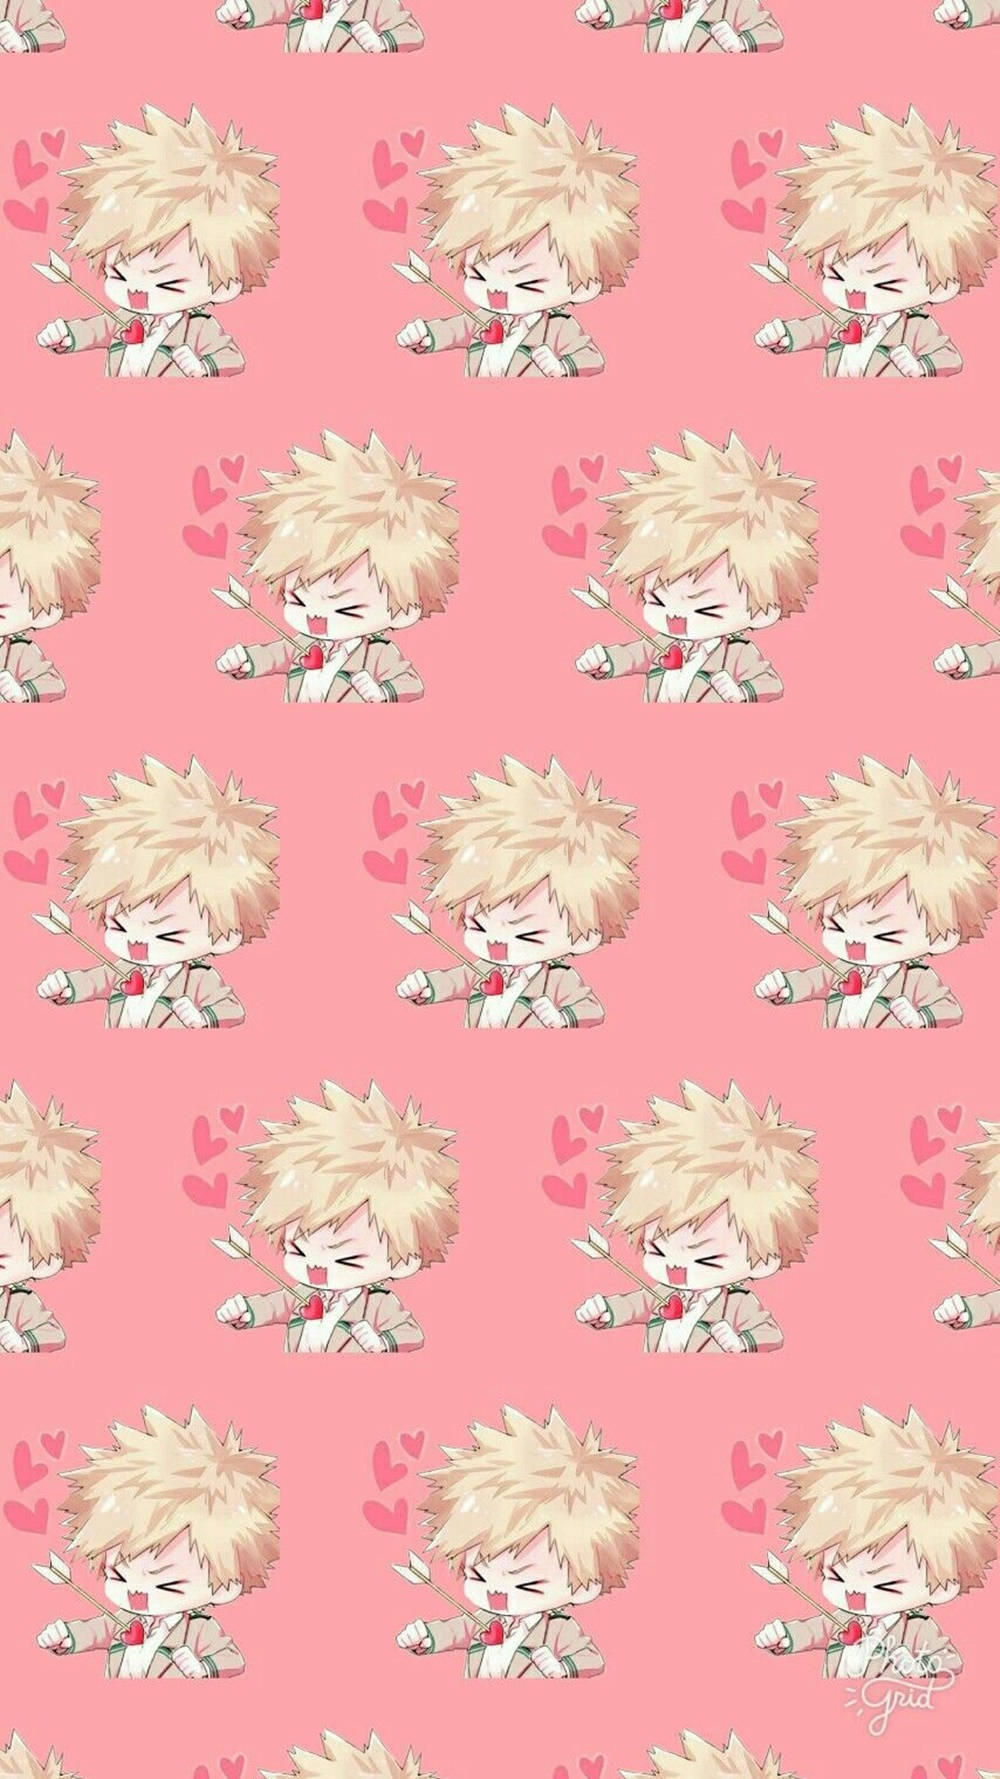 Cute Bakugou Shows Off His Unique Fiery Personality In This Fun Portrait Wallpaper